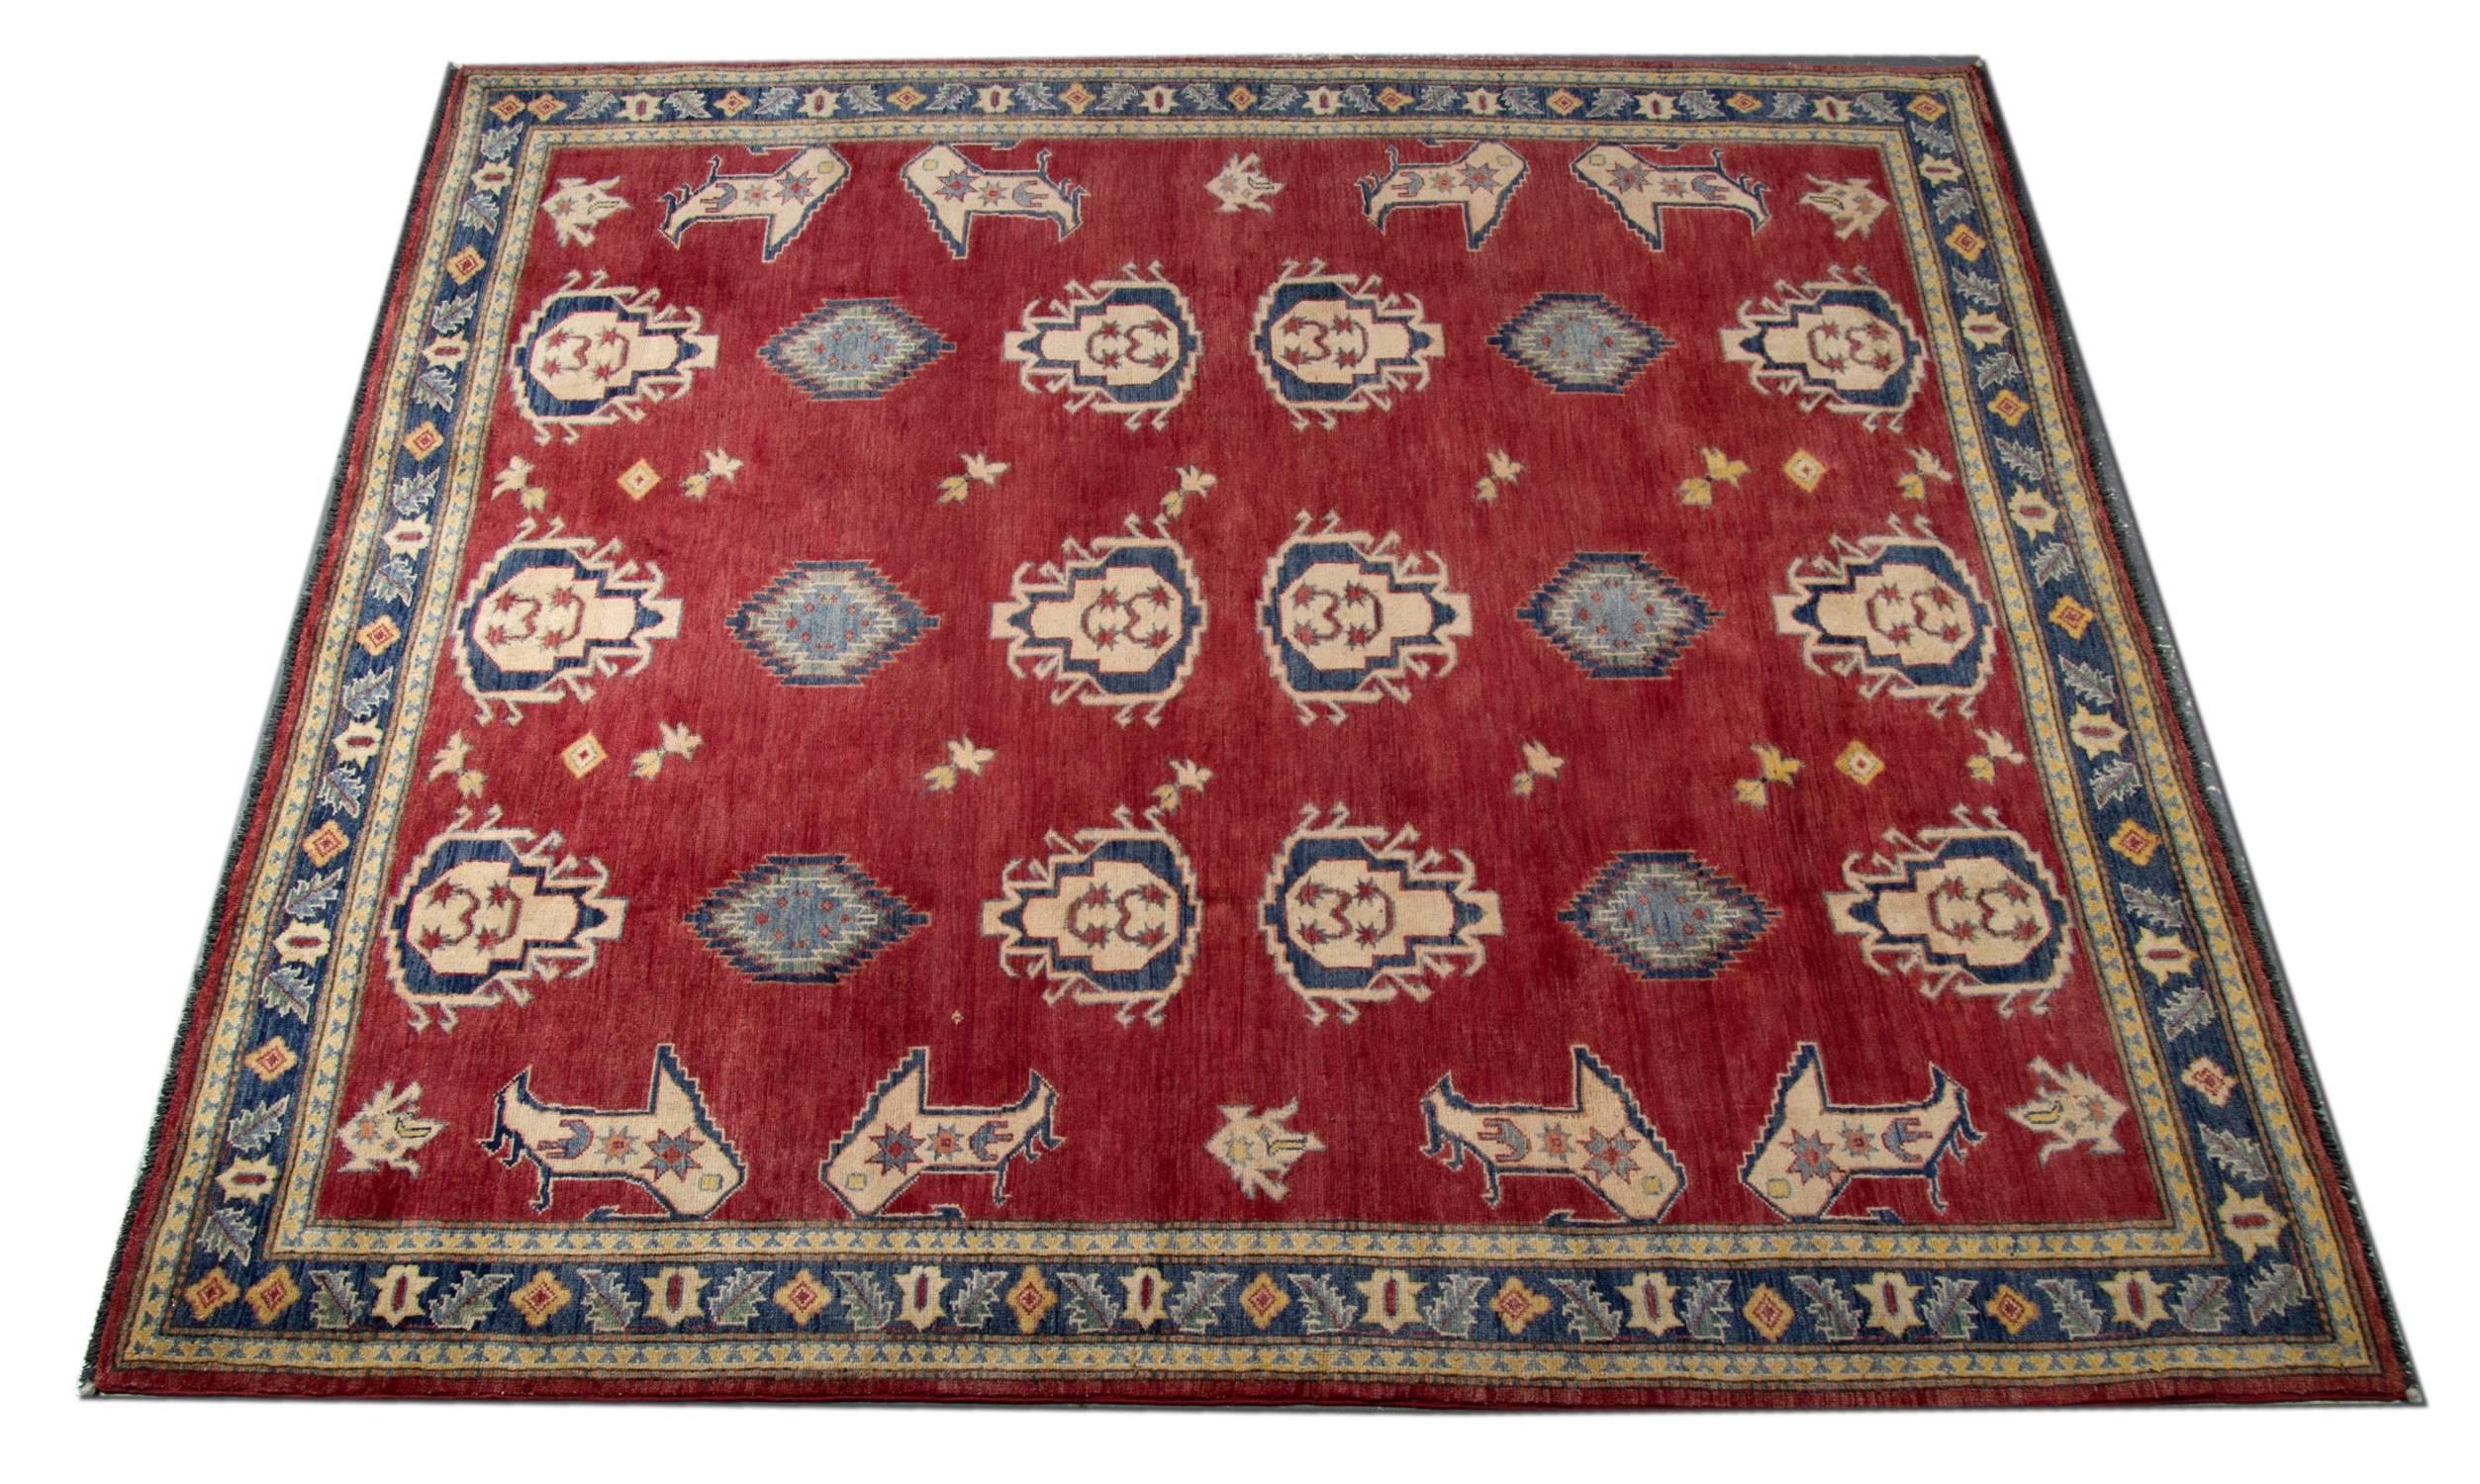 The handmade carpet elegant traditional handwoven tribal rug is made by Afghan weavers. For the production of this geometric rug are used wool and cotton. The carpet oriental rug depicts geometric designs of animals, trees and symbols which are